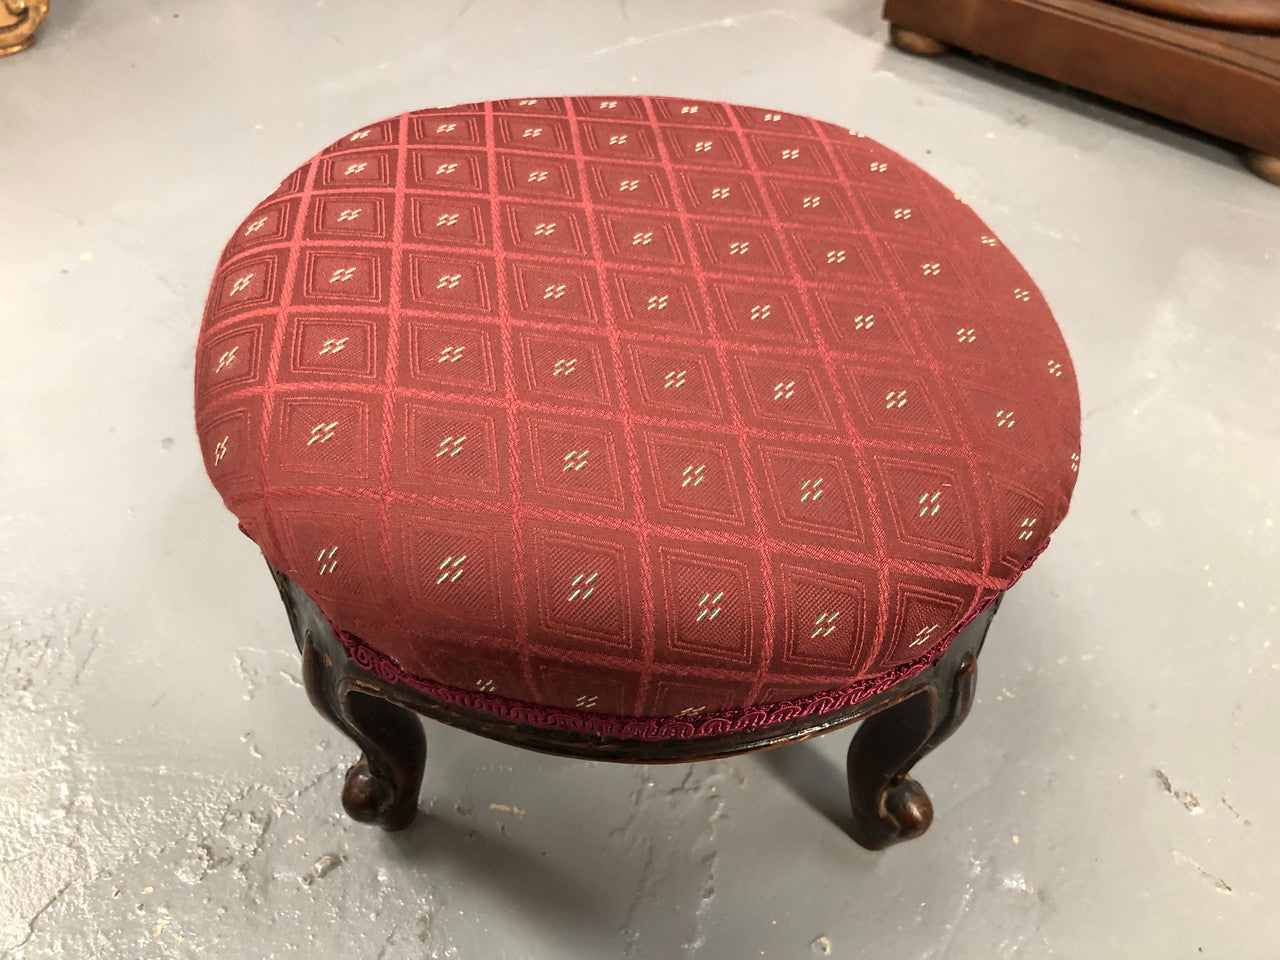 Upholstered Antique Mahogany round foot stool with beautiful carved feet. In very good original condition.